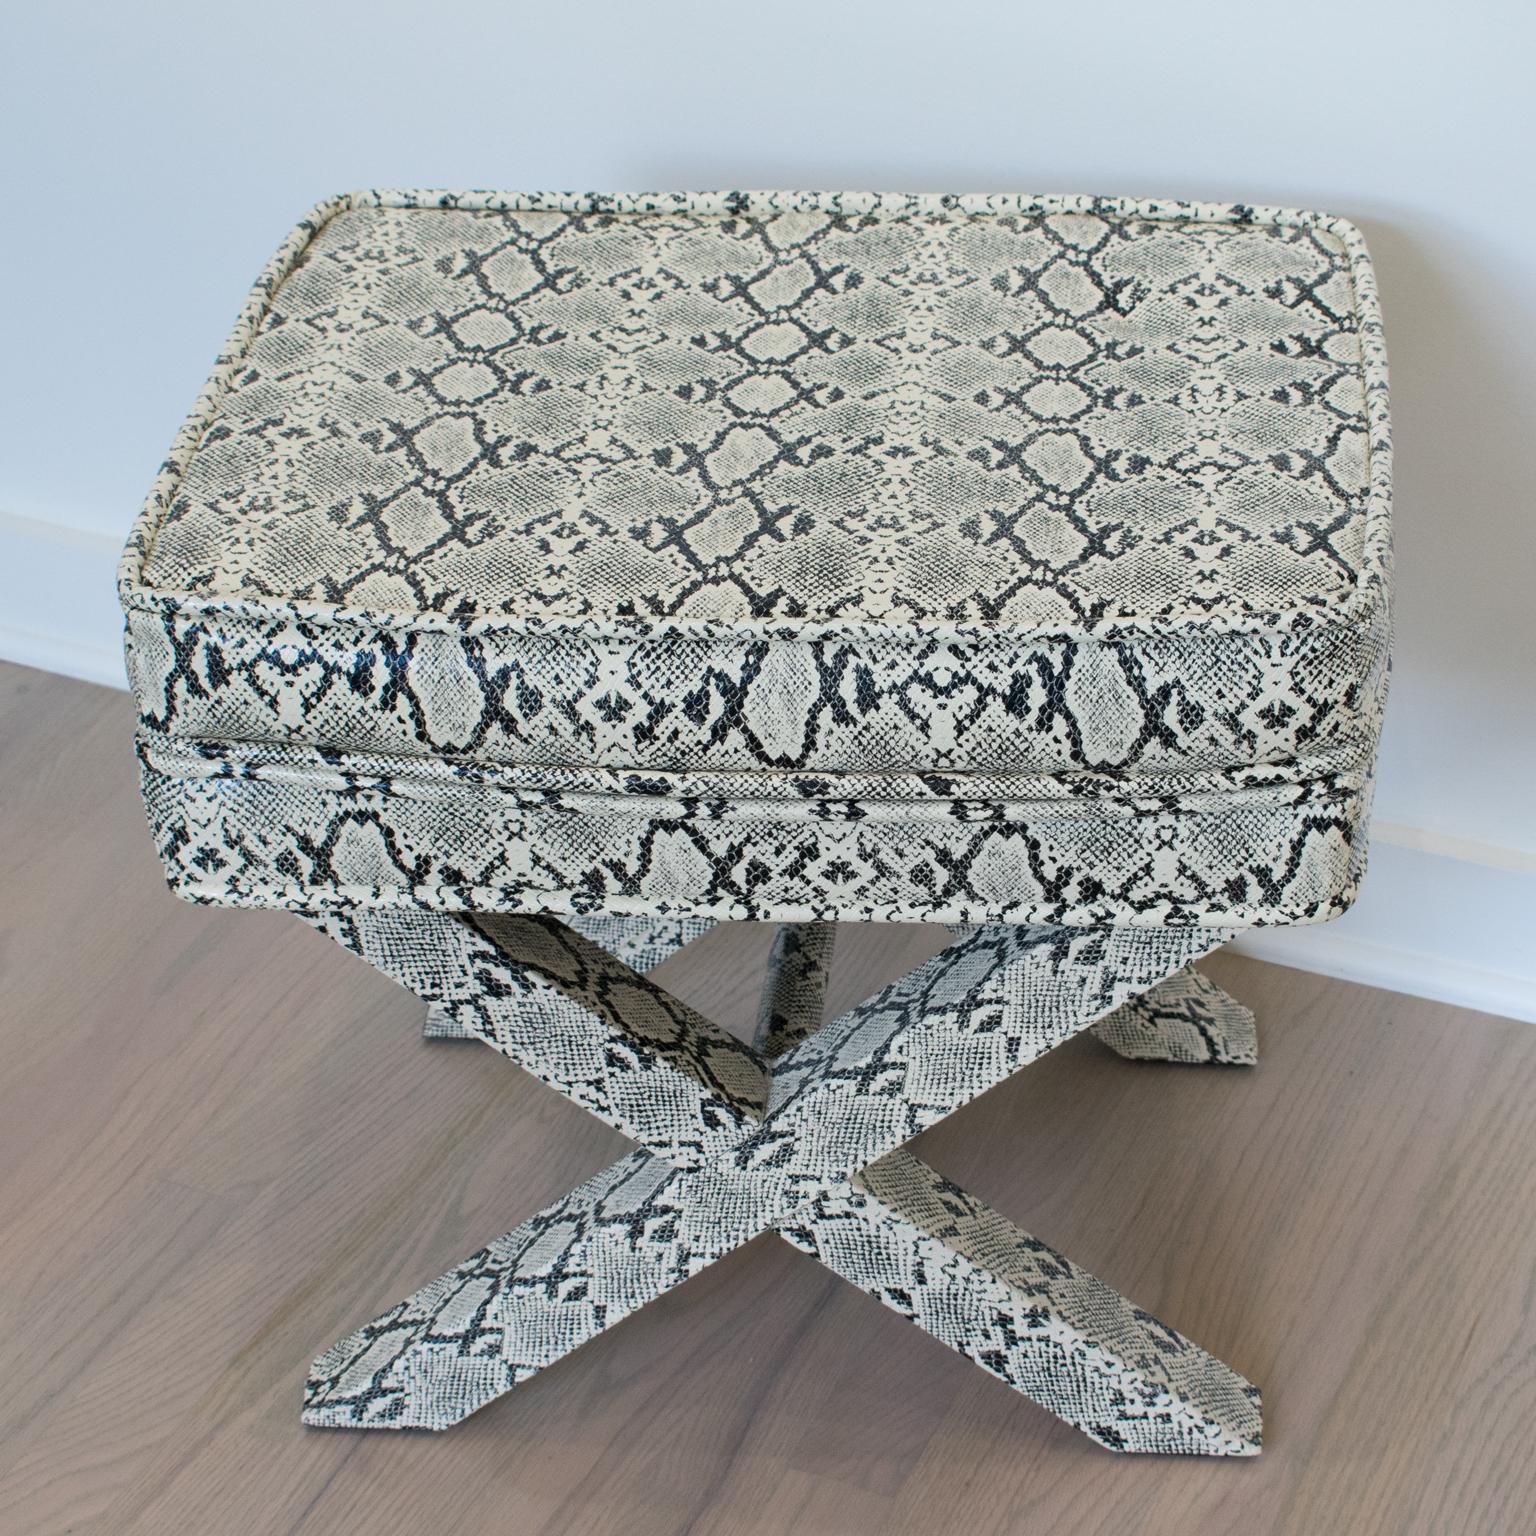 This lovely bench, ottoman, or footstool in faux python skin is crafted with fully upholstered designs reminiscent of Billy Baldwin and Karl Springer's work. The sleek urban design has a Classic 